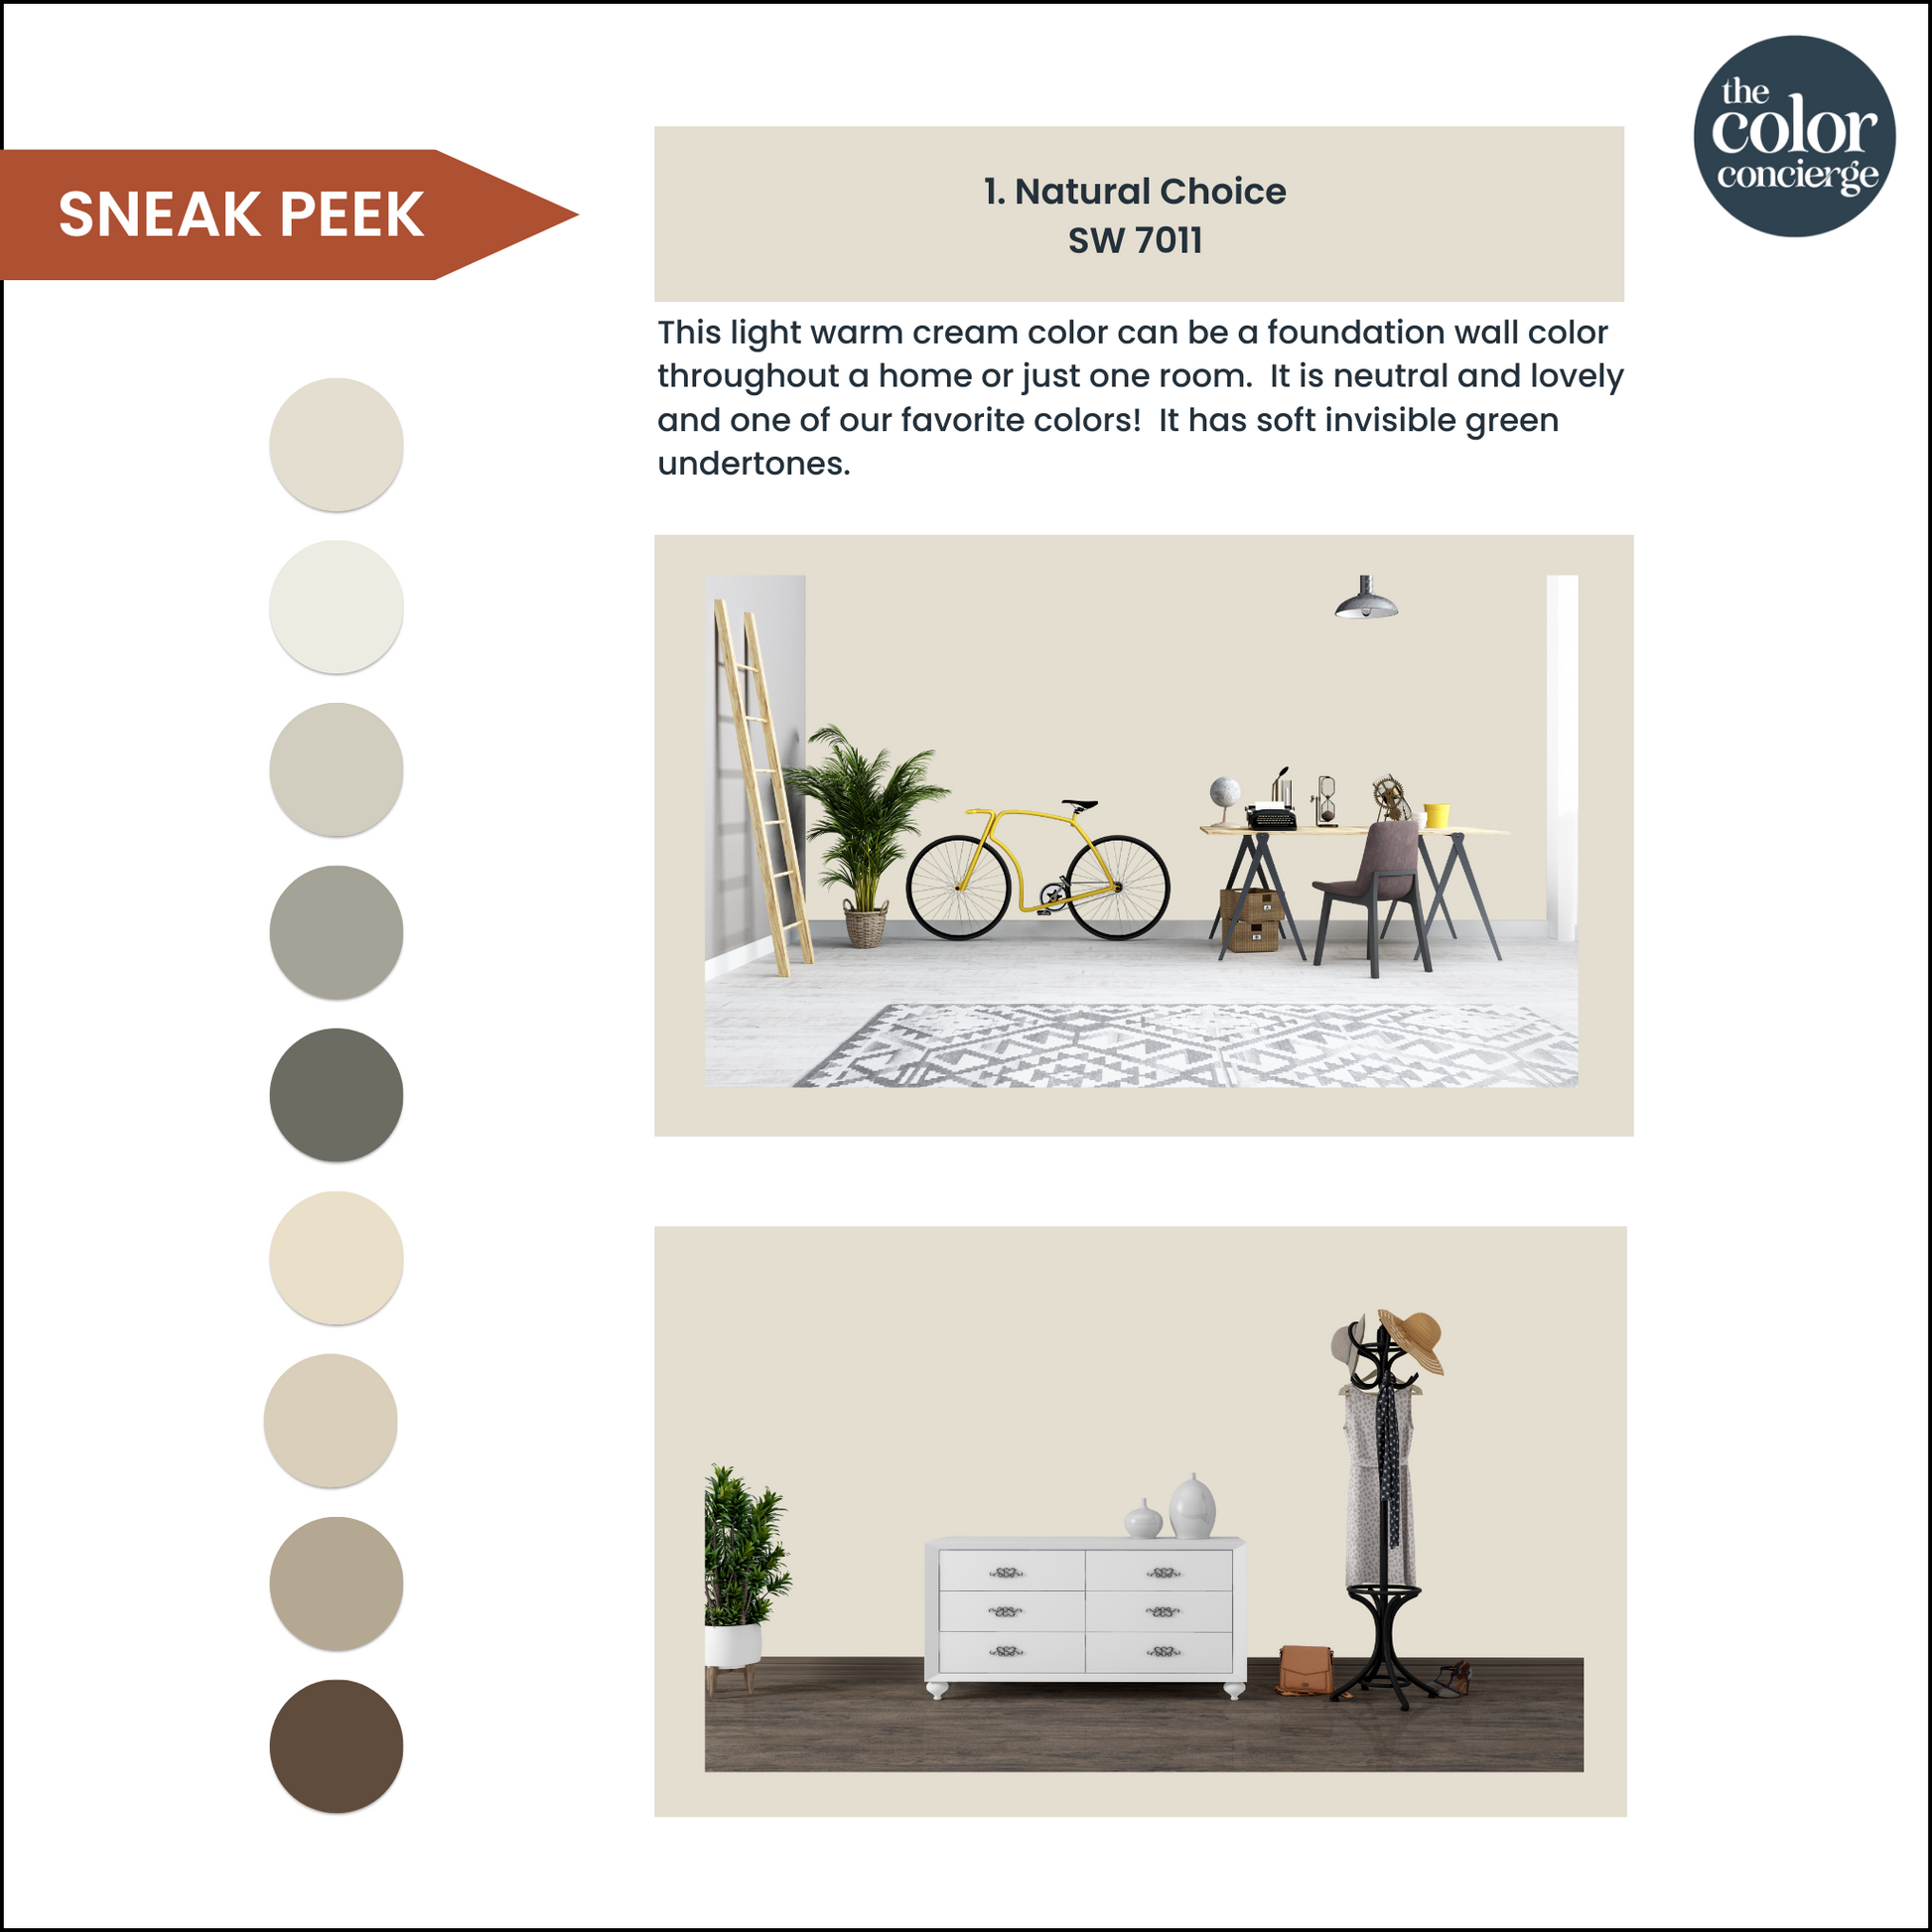 An example of how to use a Sherwin-Williams Natural Choice color palette